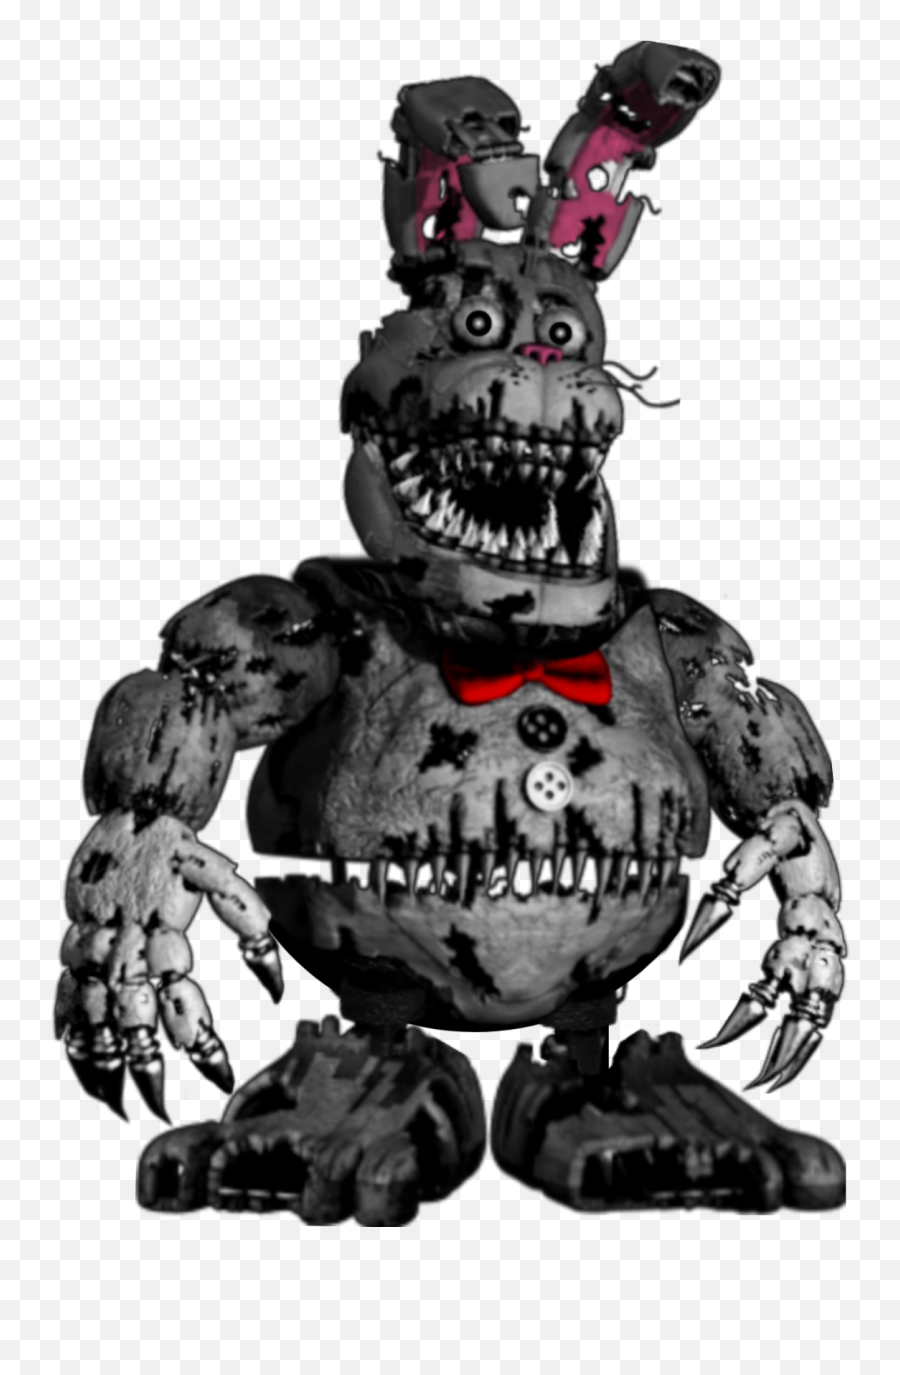 Fivenightsatfreddys - There Is No Meme Show Me Your Tits Png,Big Chungus Png